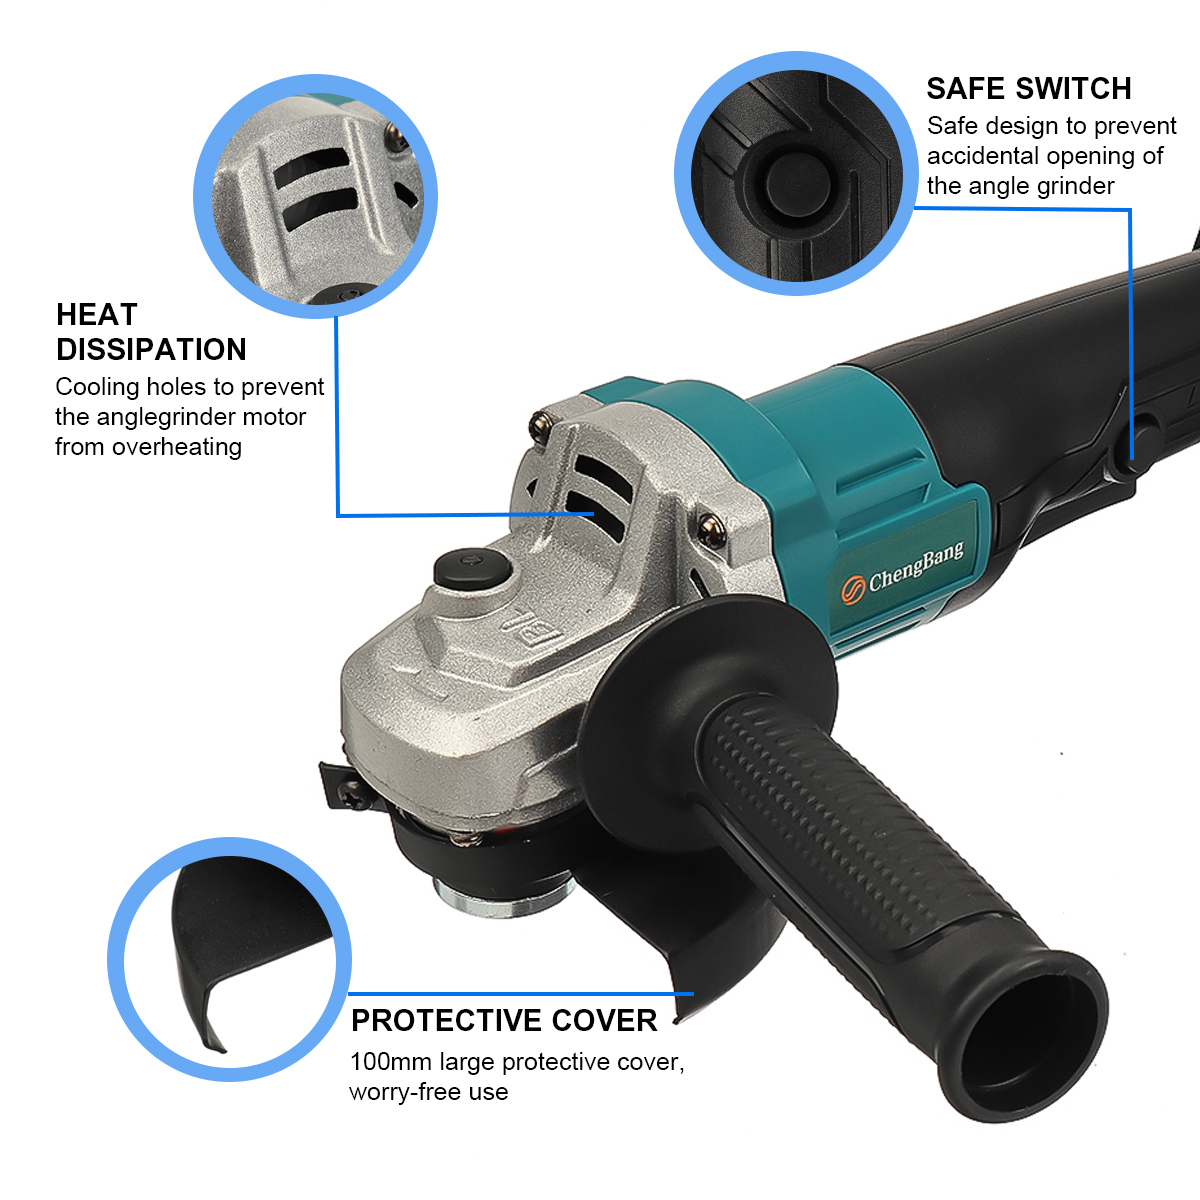 100mm-1580W-Electric-Cordless-Brushless-Angle-Grinder-Grinding-Cutting-Machine-Tool-Fit-Makita-EU-Pl-1891857-7